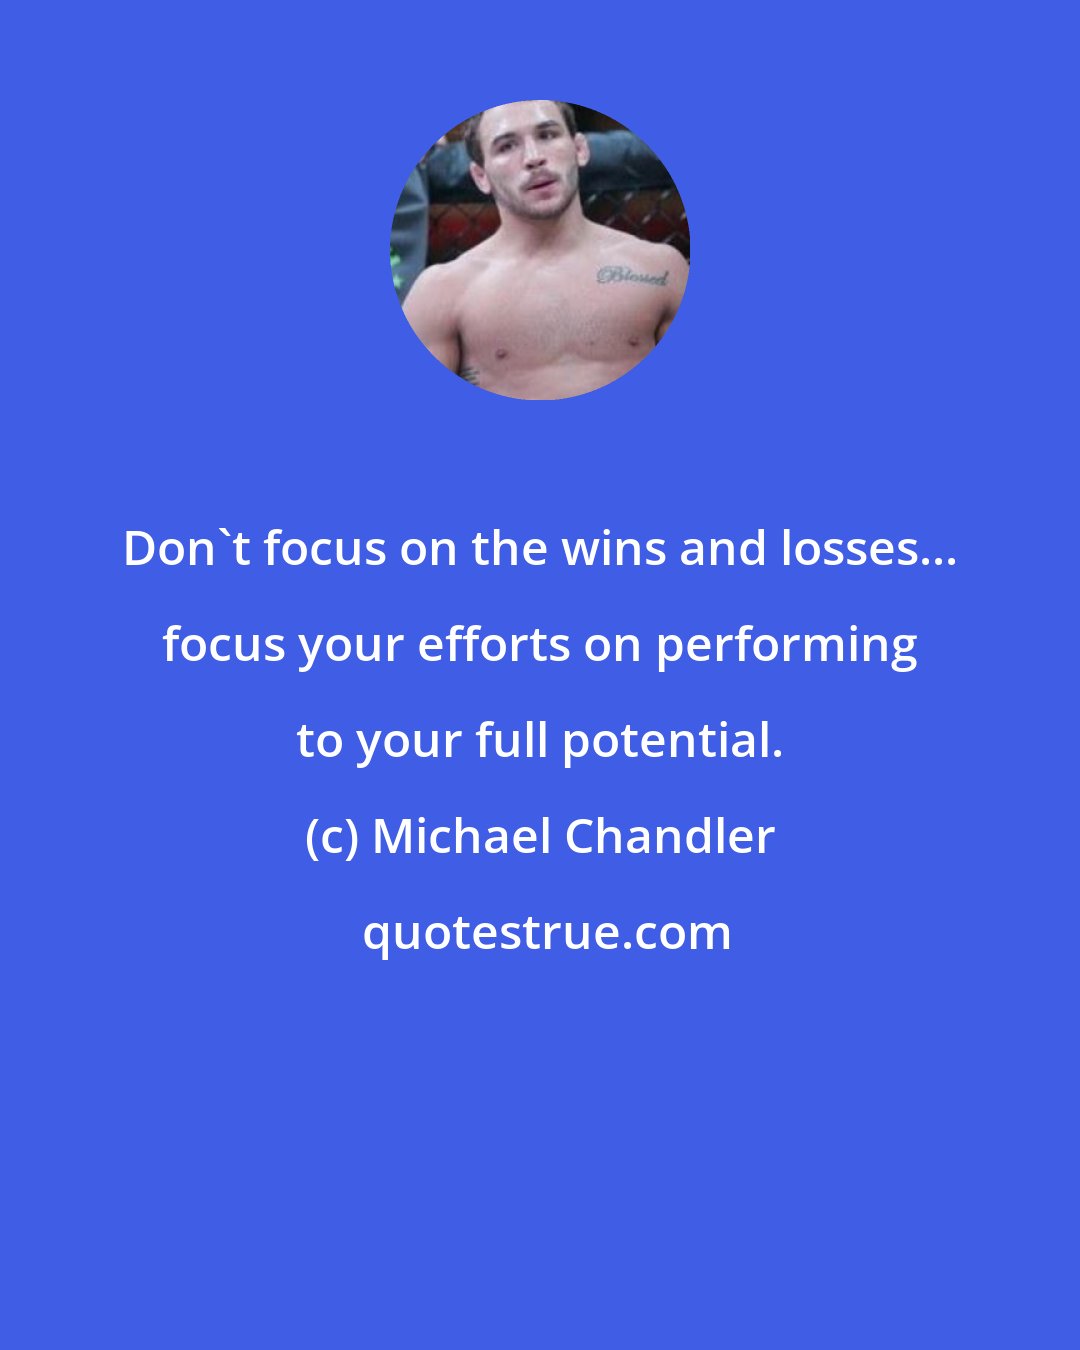 Michael Chandler: Don't focus on the wins and losses... focus your efforts on performing to your full potential.